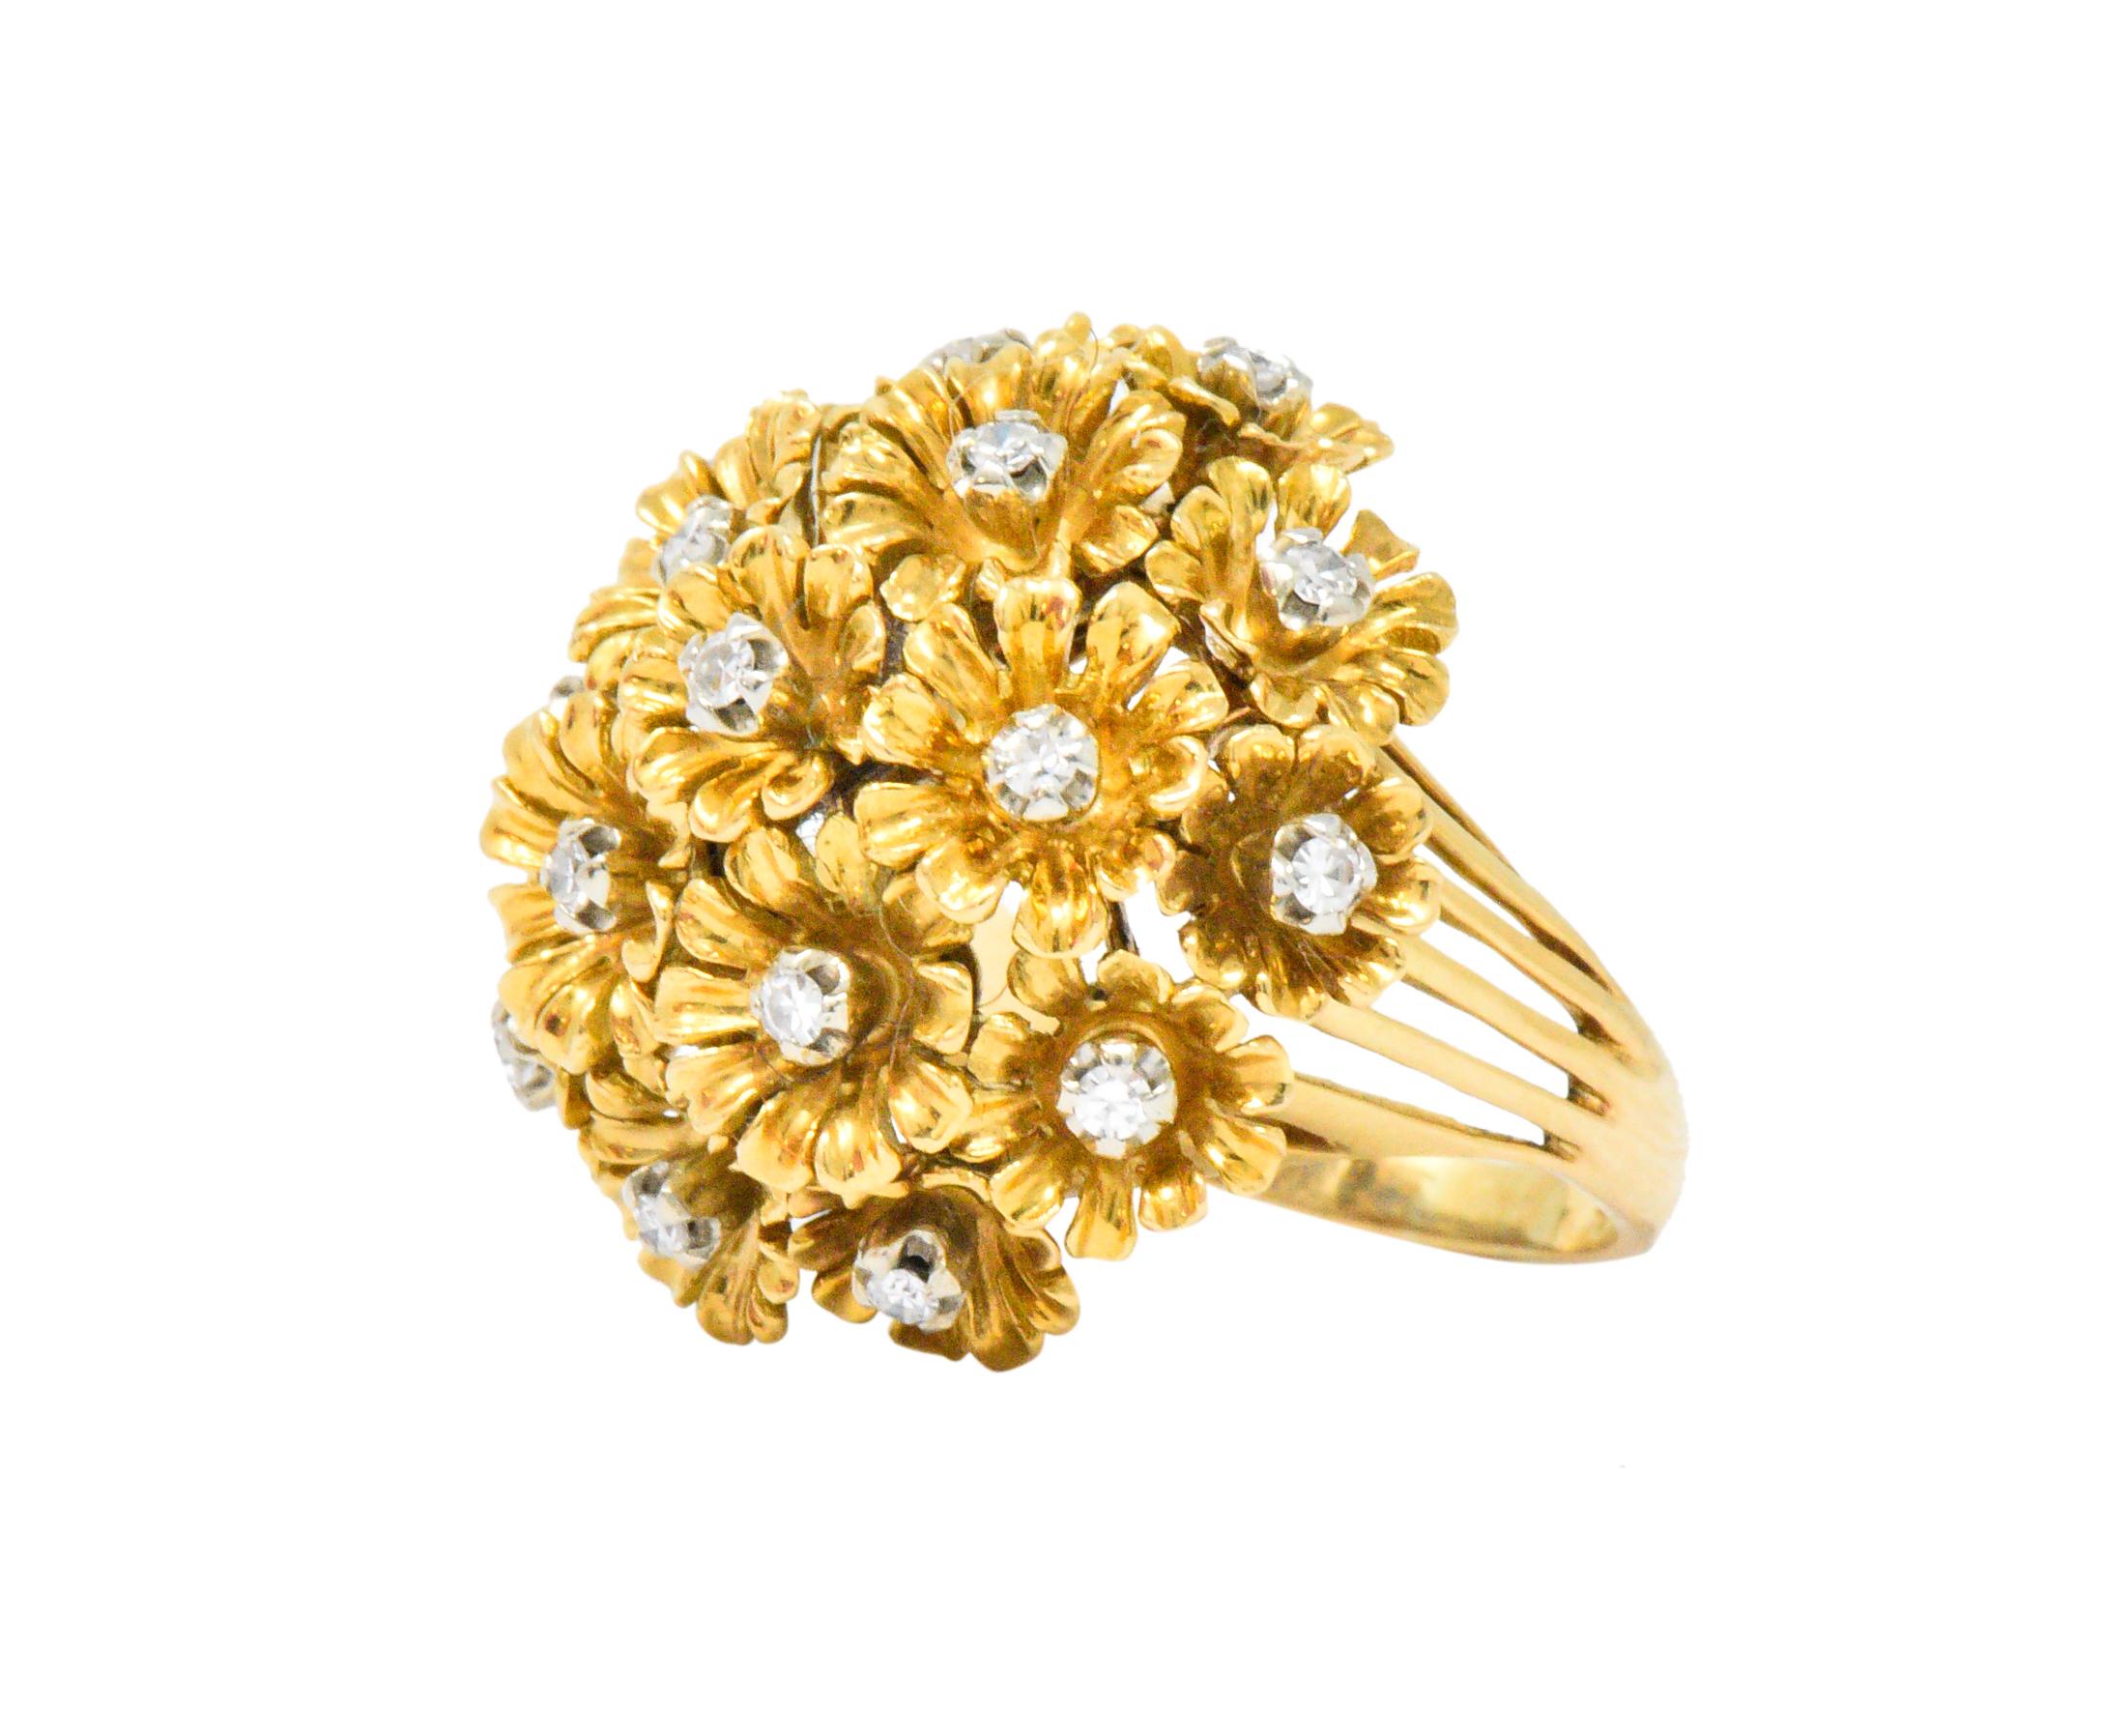 Designed as a bouquet of flowers

Sixteen flowers, each centering a single cut diamond

Total diamond weight approximately 0.25 carat, G/H color and VS clarity

Articulated for slight movement

Detailed gold petals and multiple split shank 

Ring